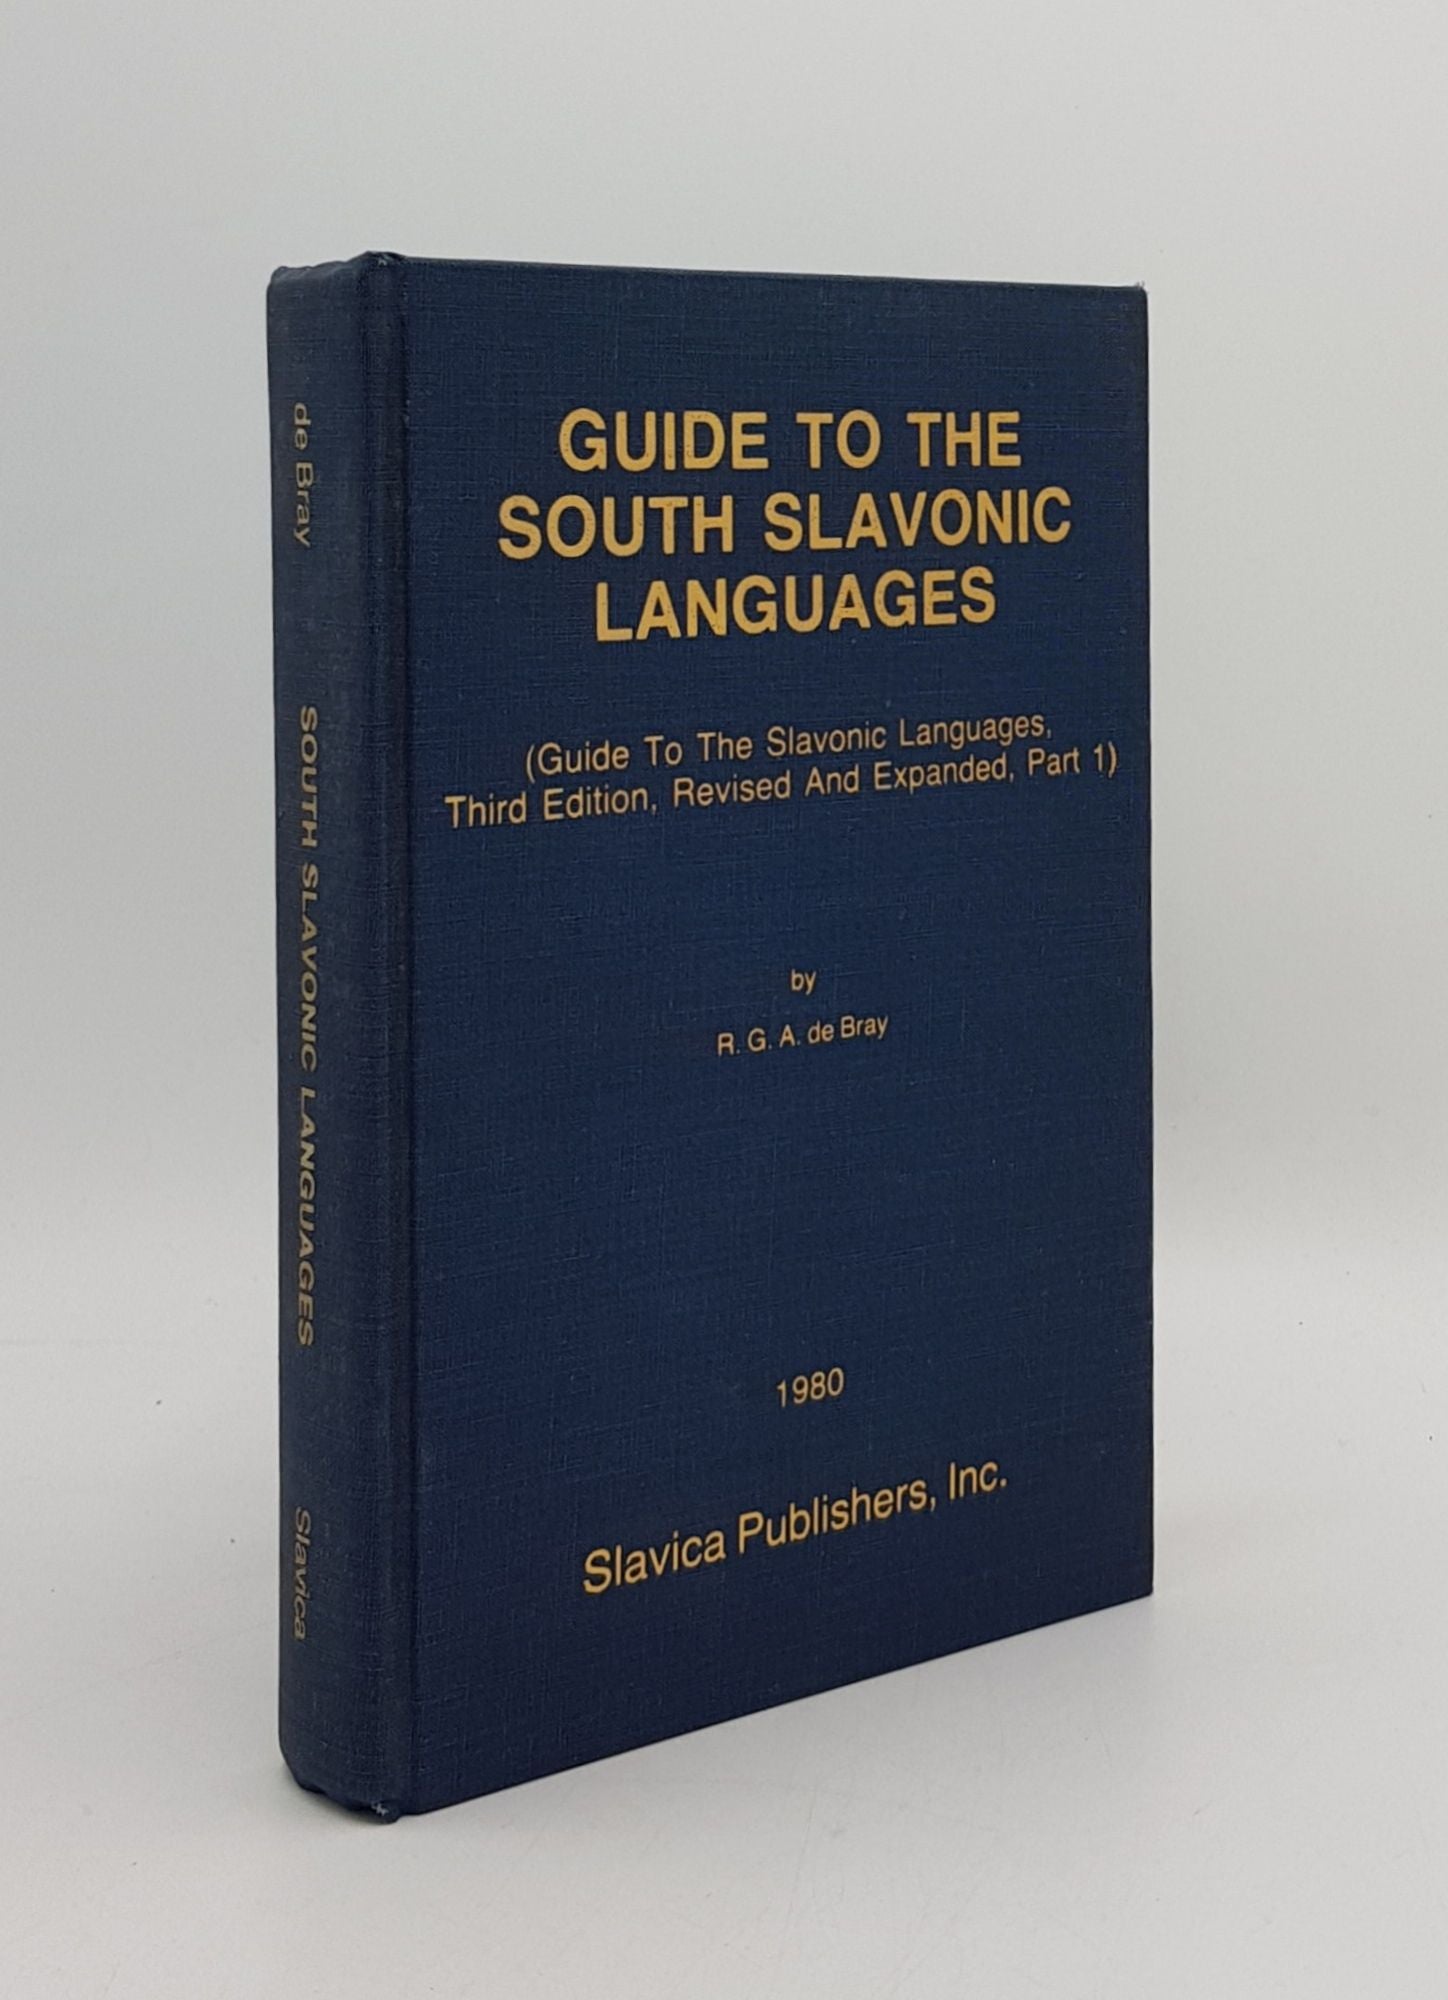 DE BRAY R.G.A. - Guide to the South Slavonic Languages Guide to the Slavonic Languages Third Edition Revised and Expanded Part 1